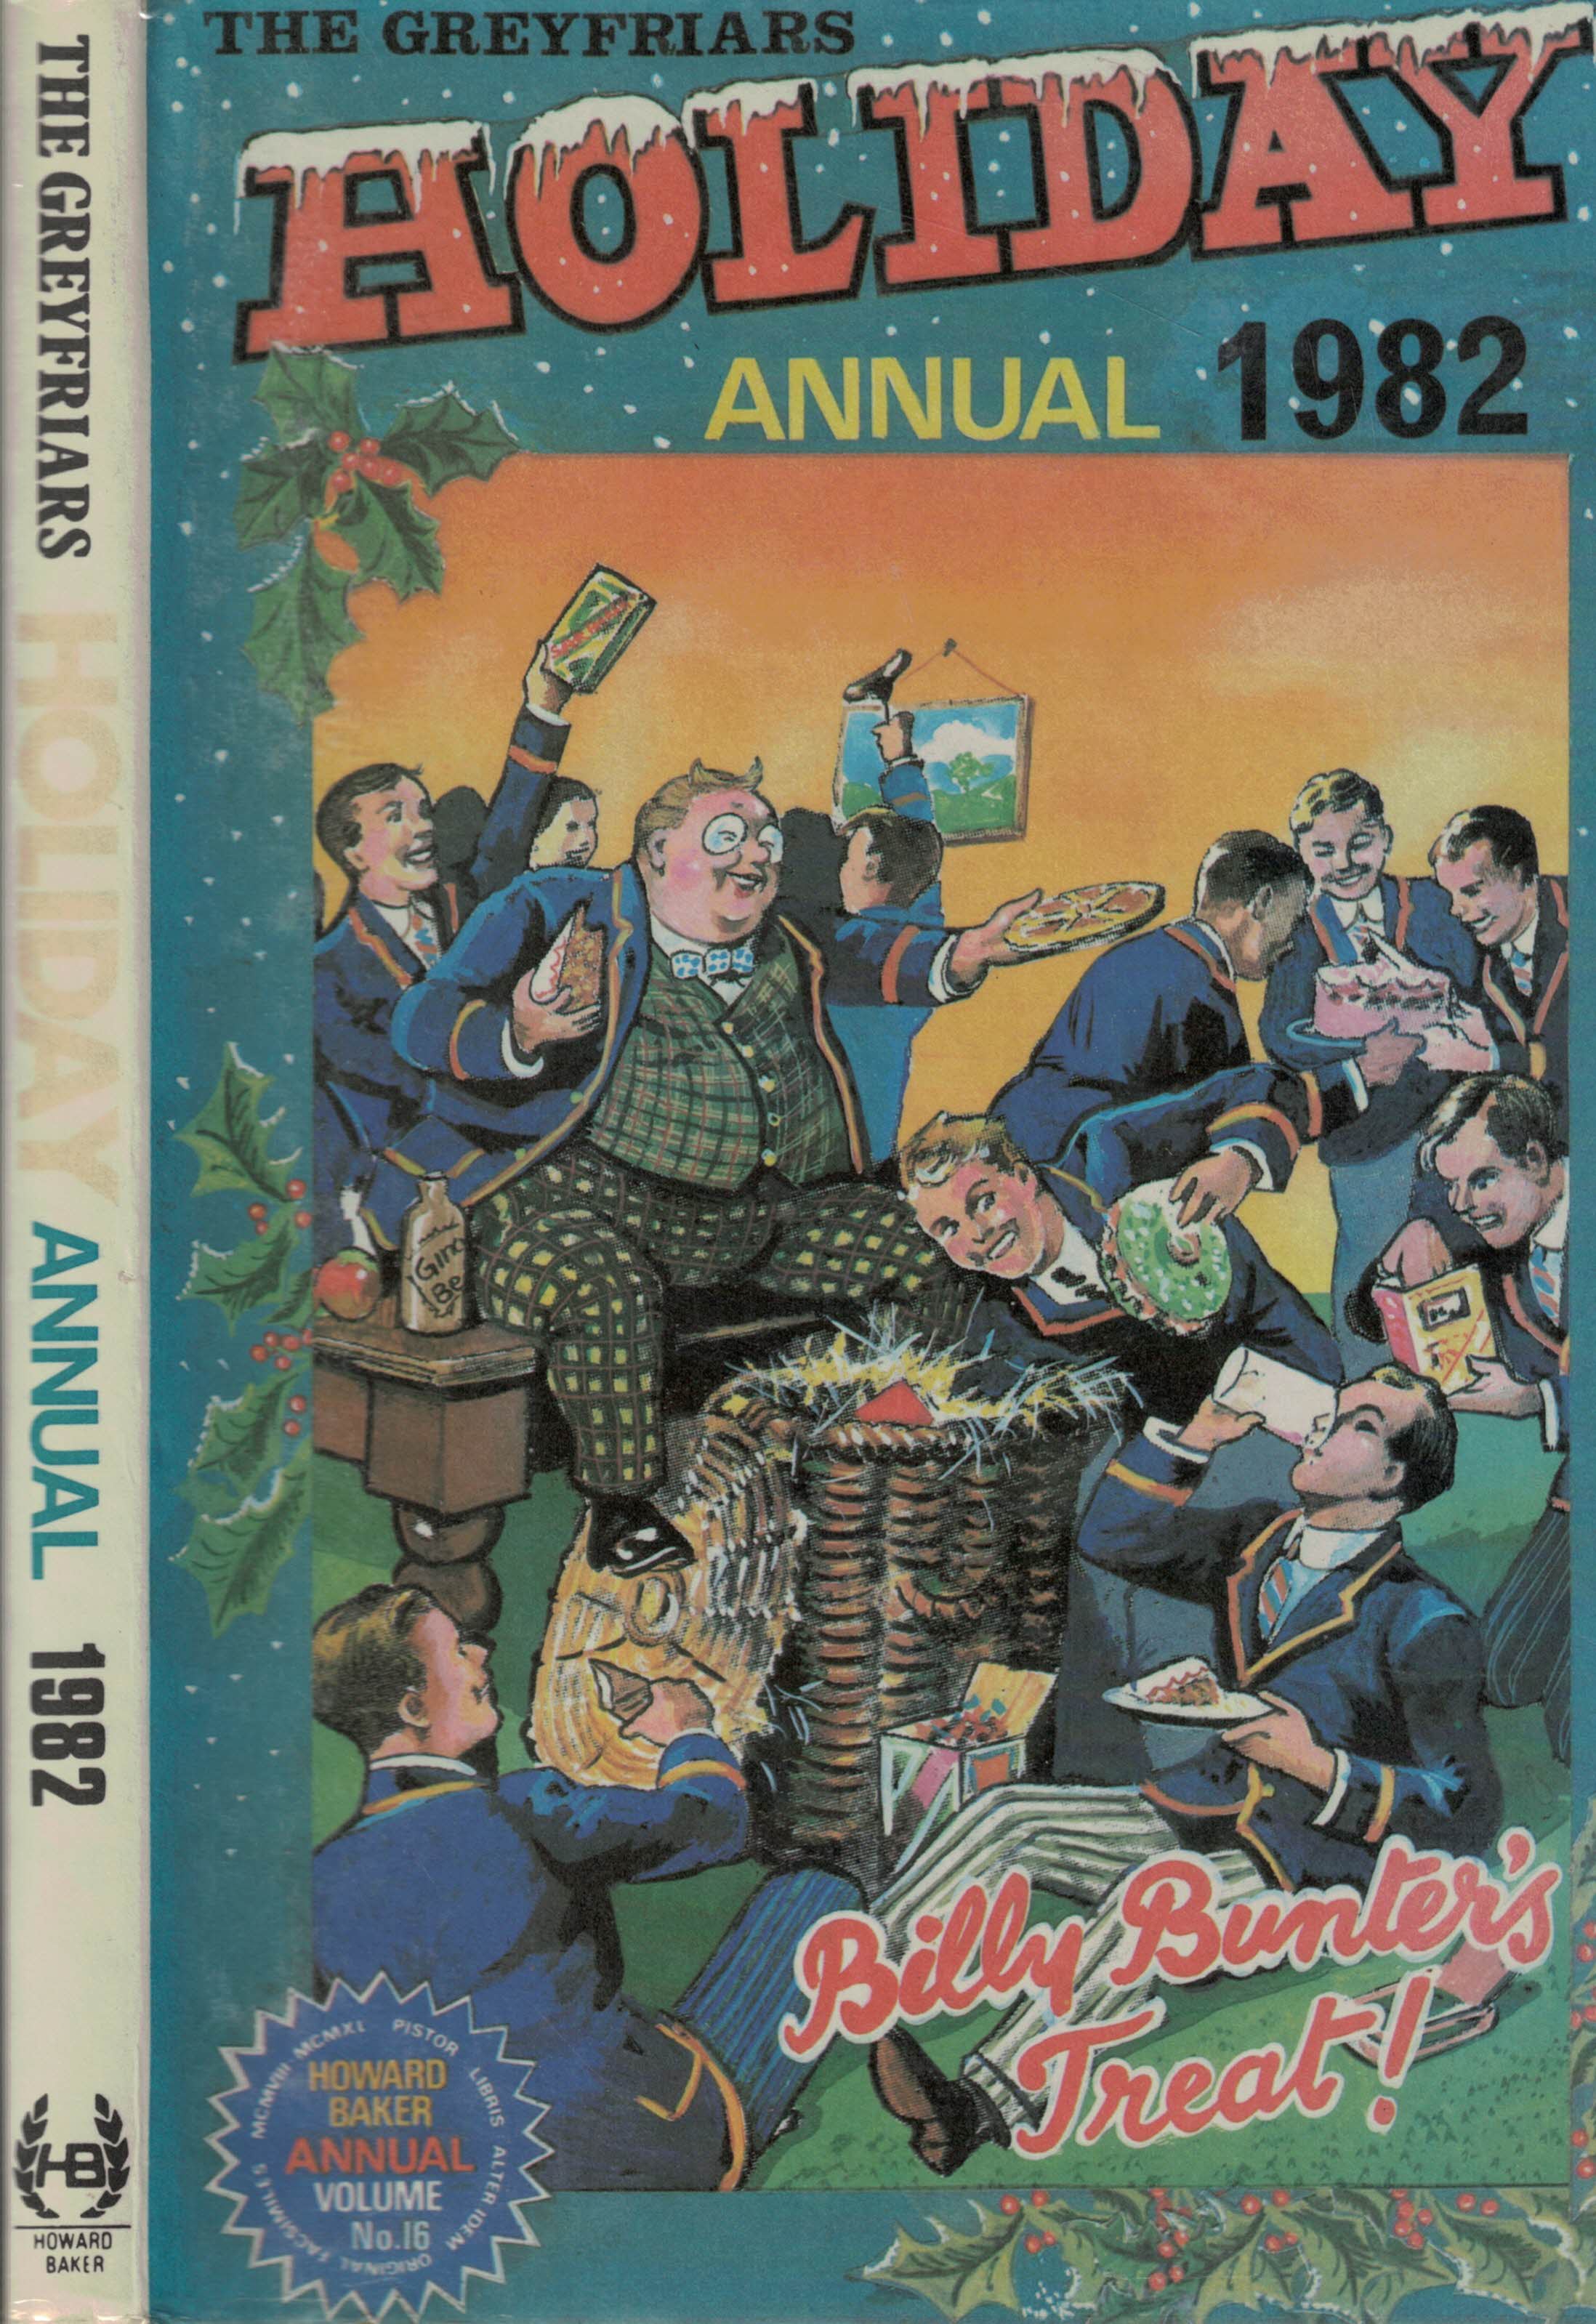 The Greyfriars Holiday Annual 1982